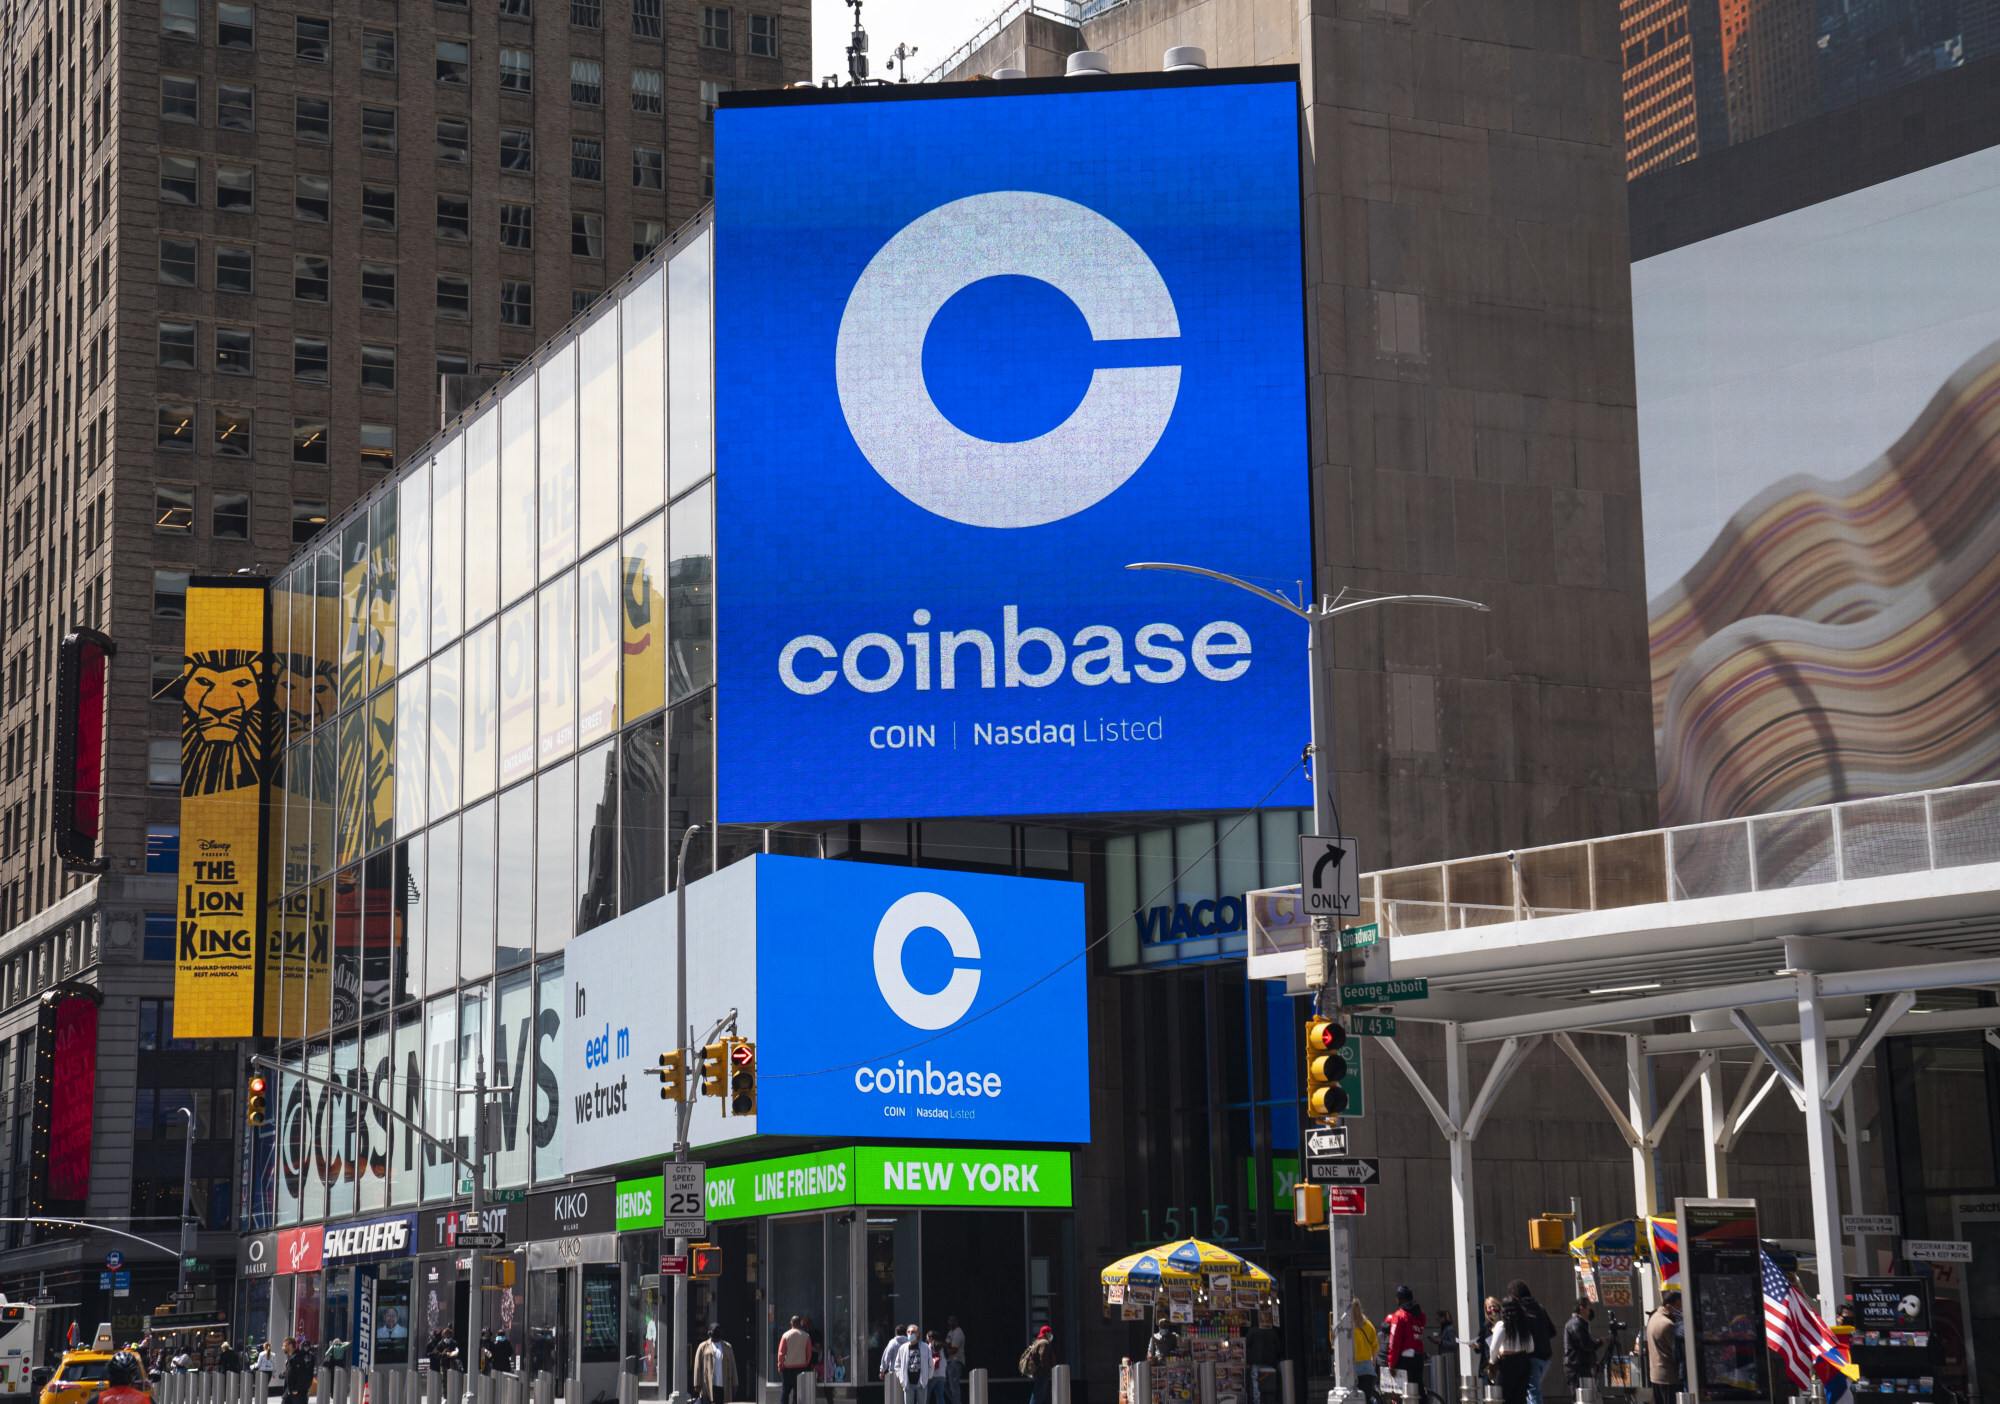 A sign advertising Coinbase in New York. Coinbase is an American company that operates a cryptocurrency exchange platform. Photo: Getty Images